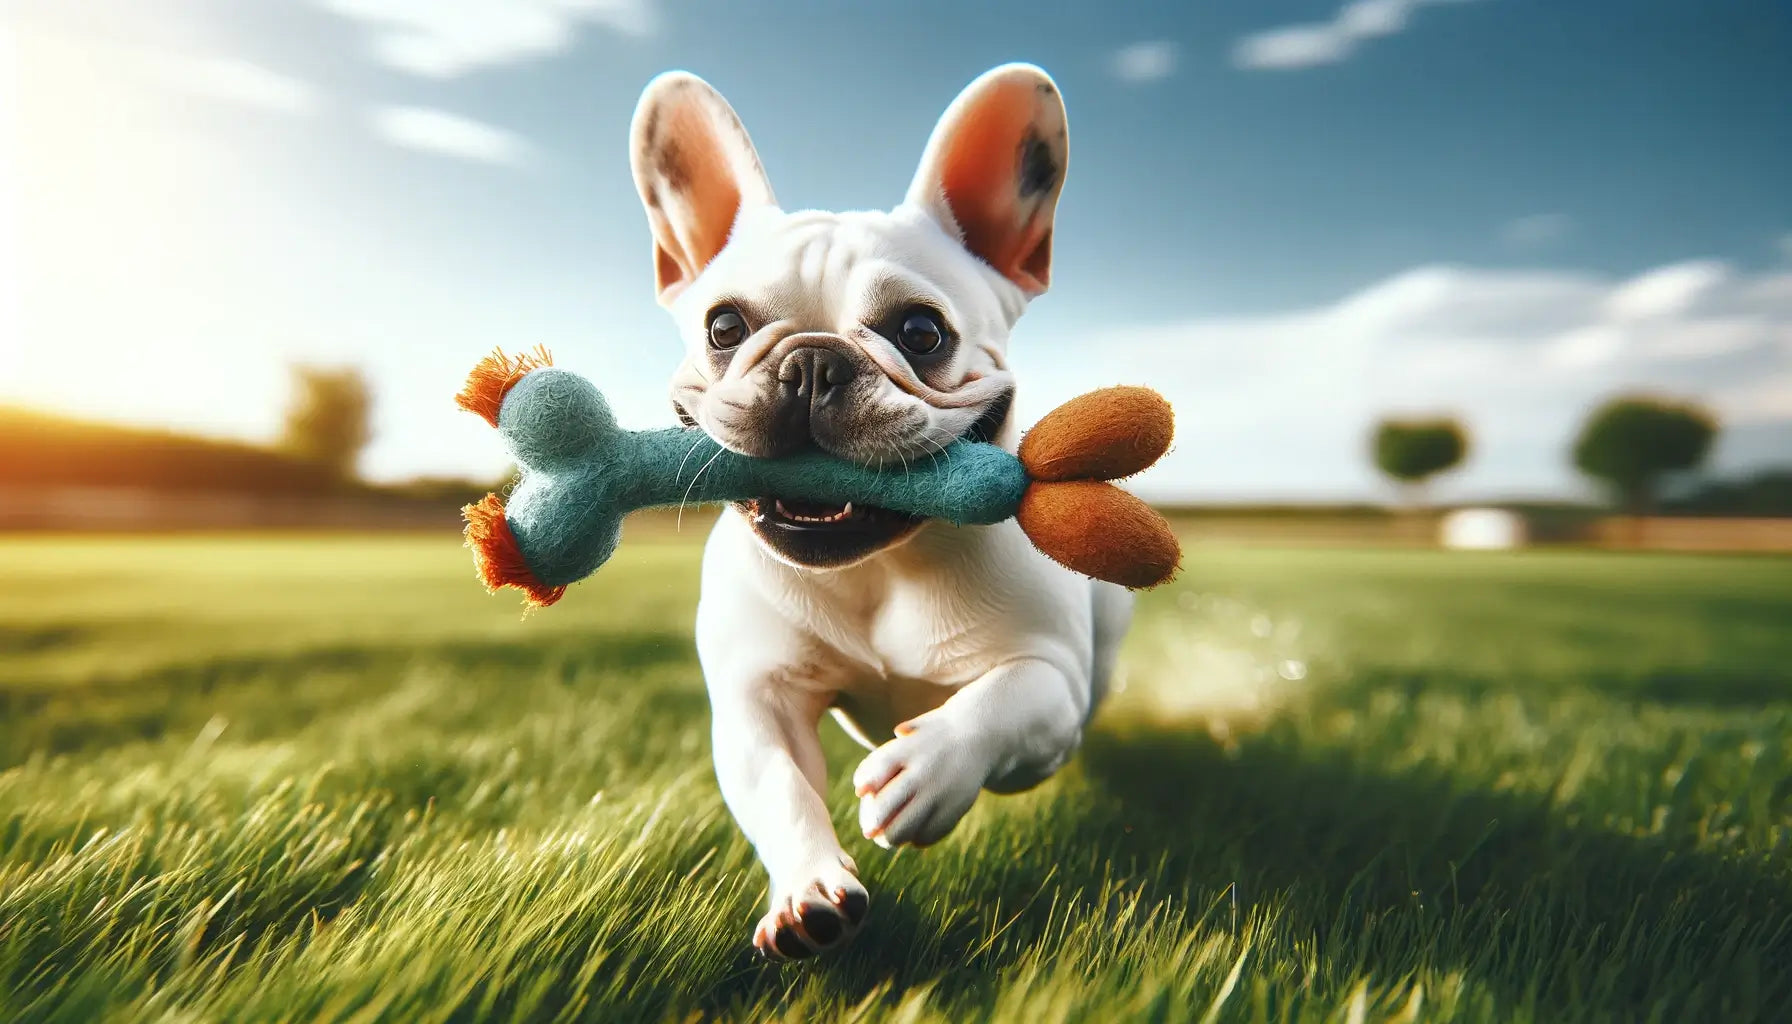 White French Bulldog in motion, running through grass with a toy in its mouth.